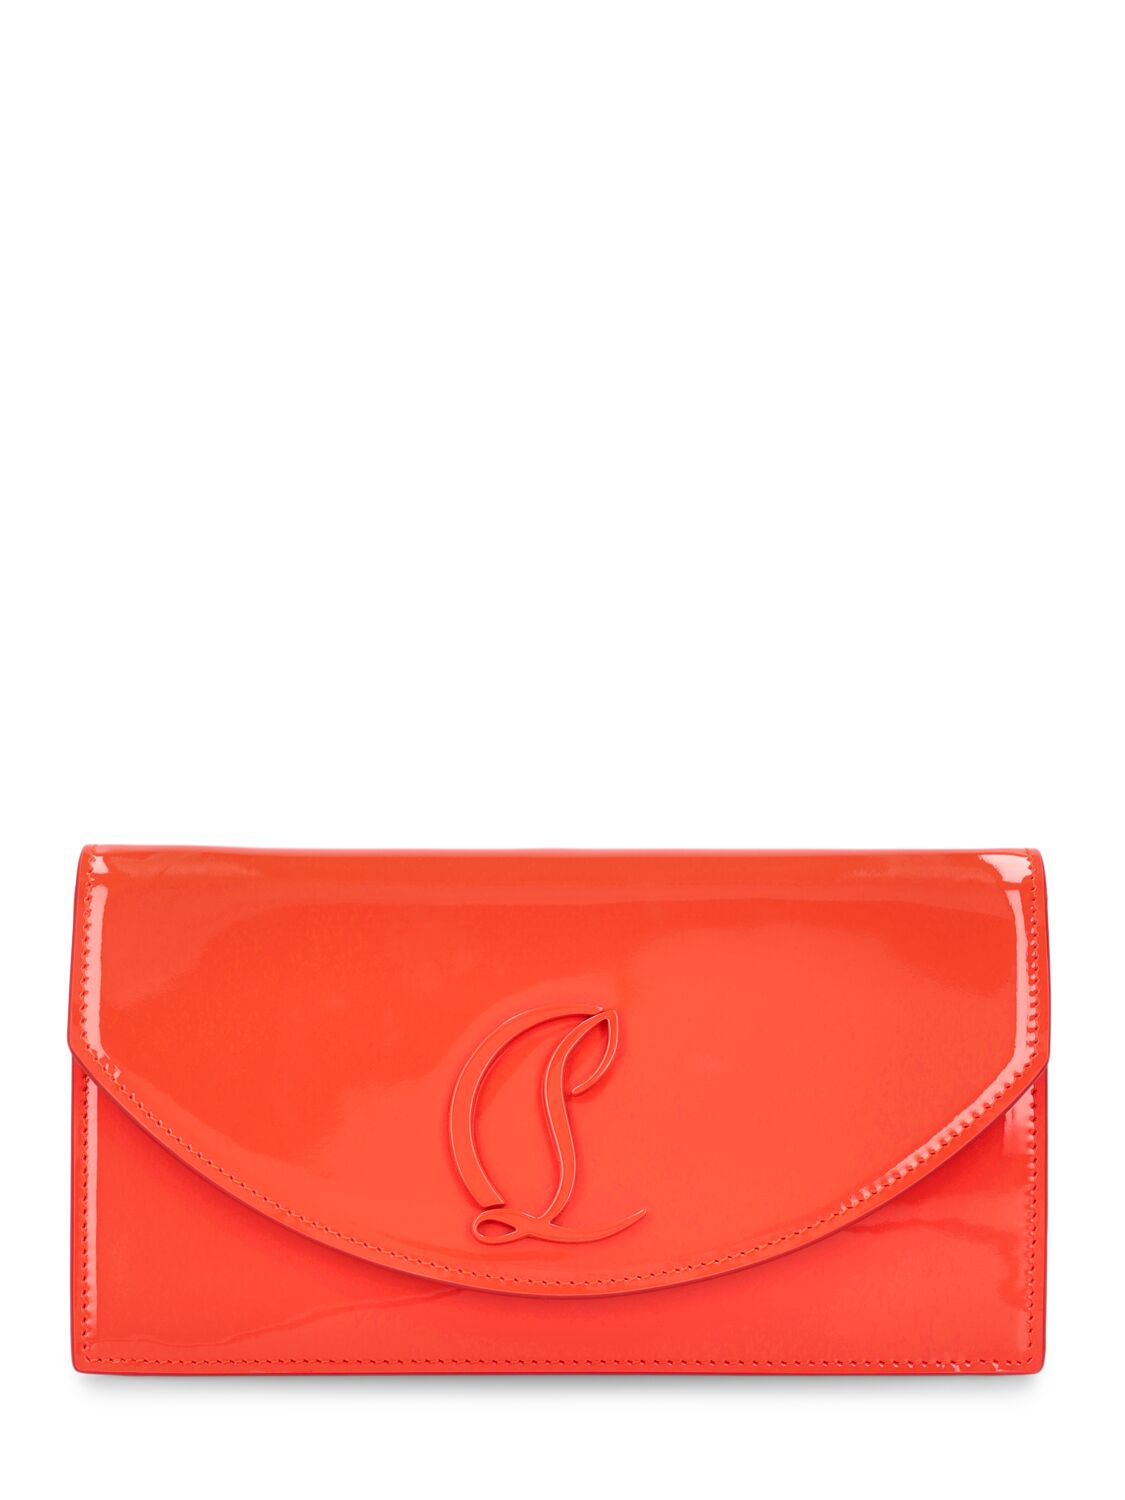 Small Loubi54 Patent Leather Clutch